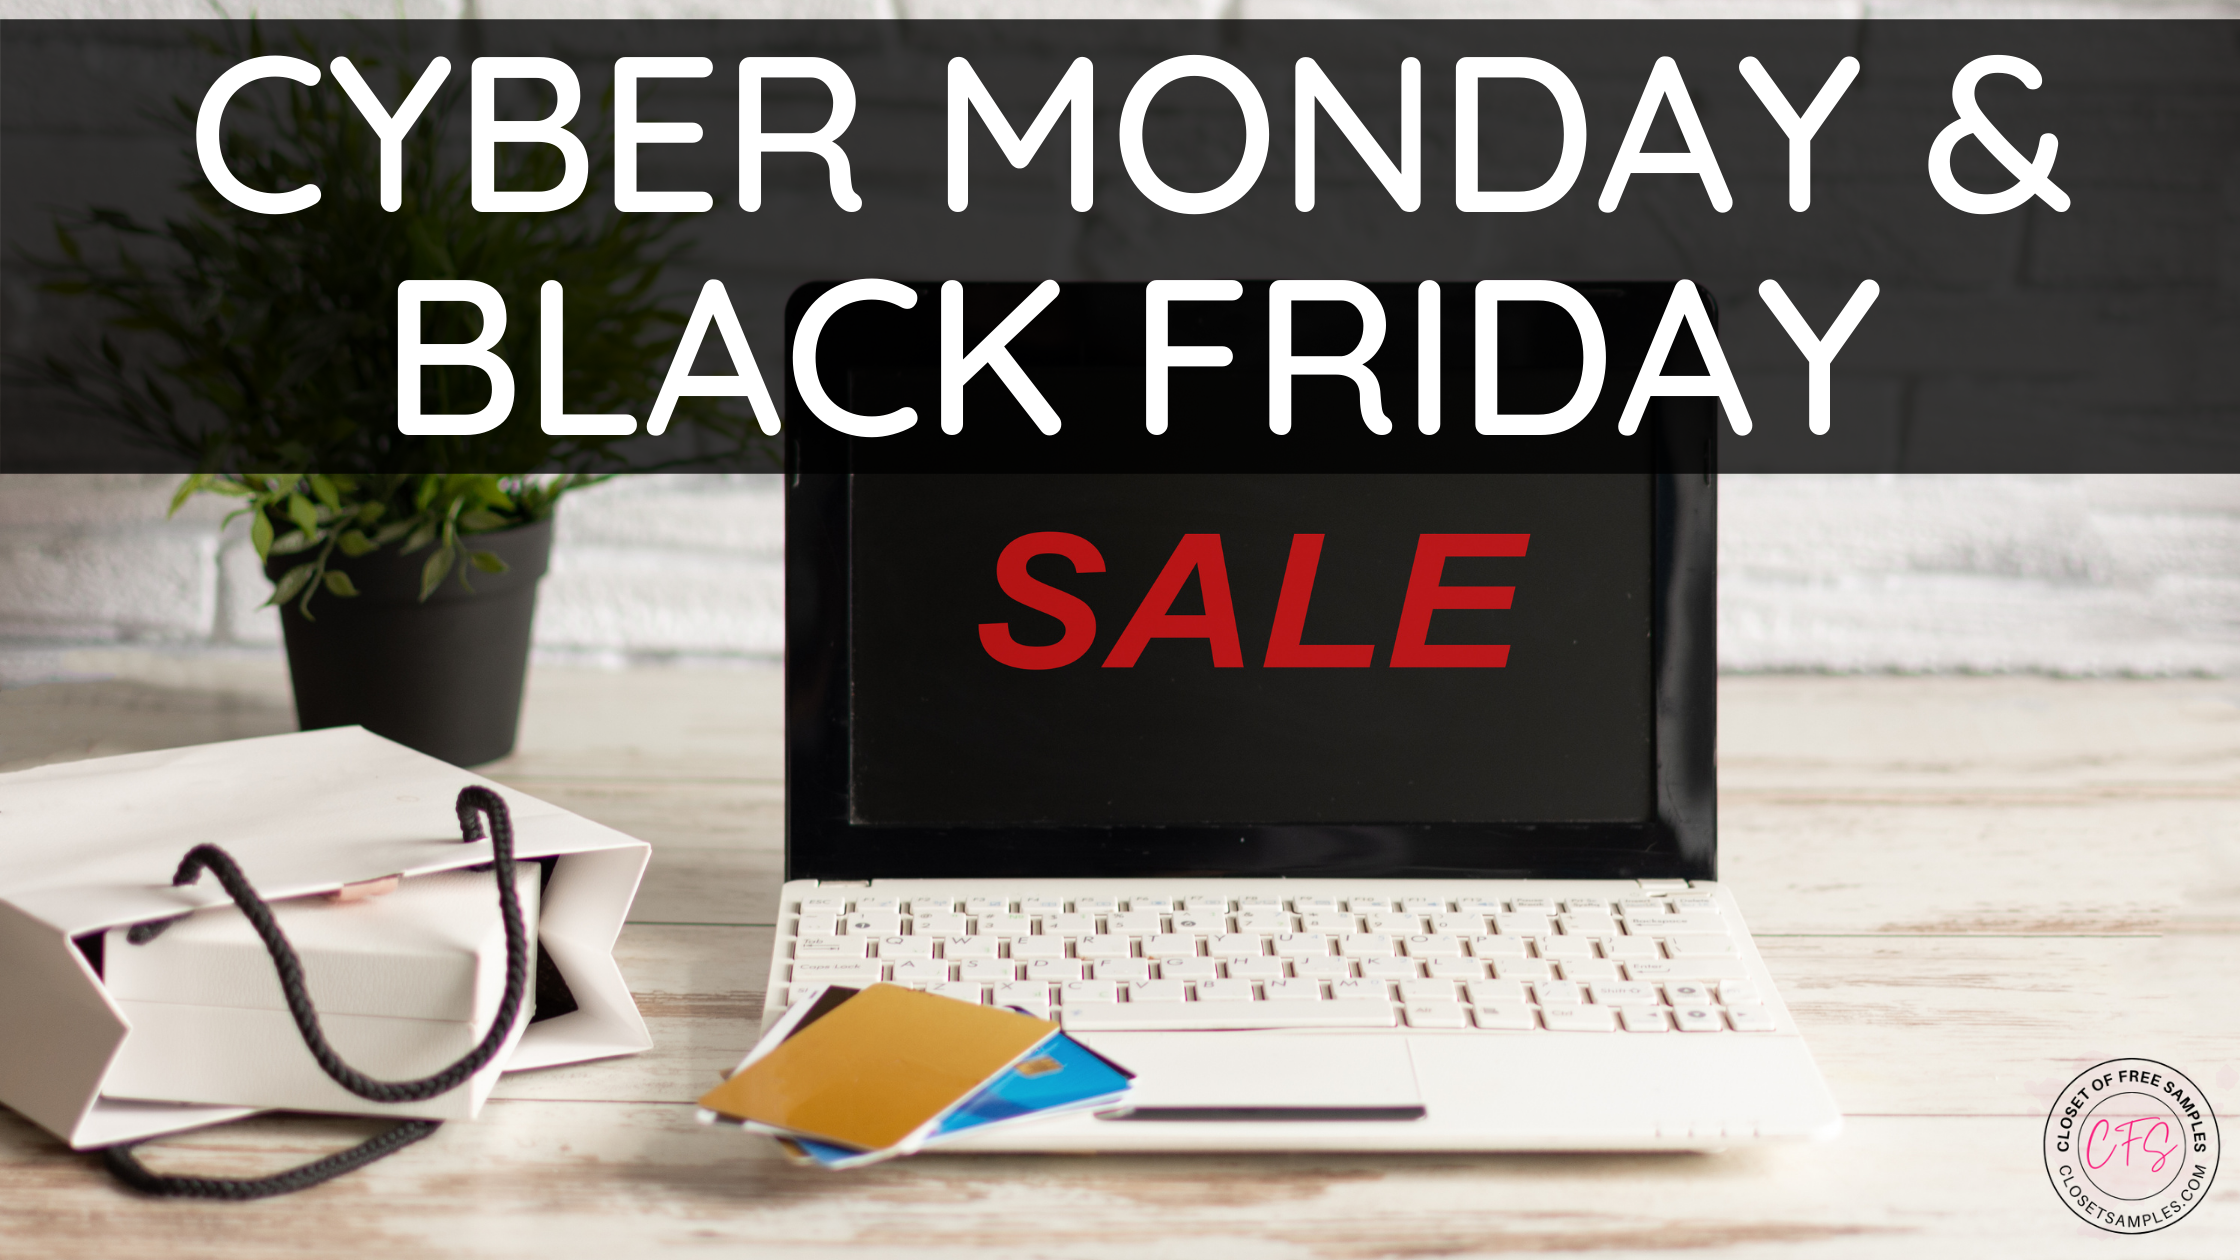 The-Ultimate-Deals-Finding-FAQ-Closetsamples-Deal-Finder-cyber-monday-black-friday.png